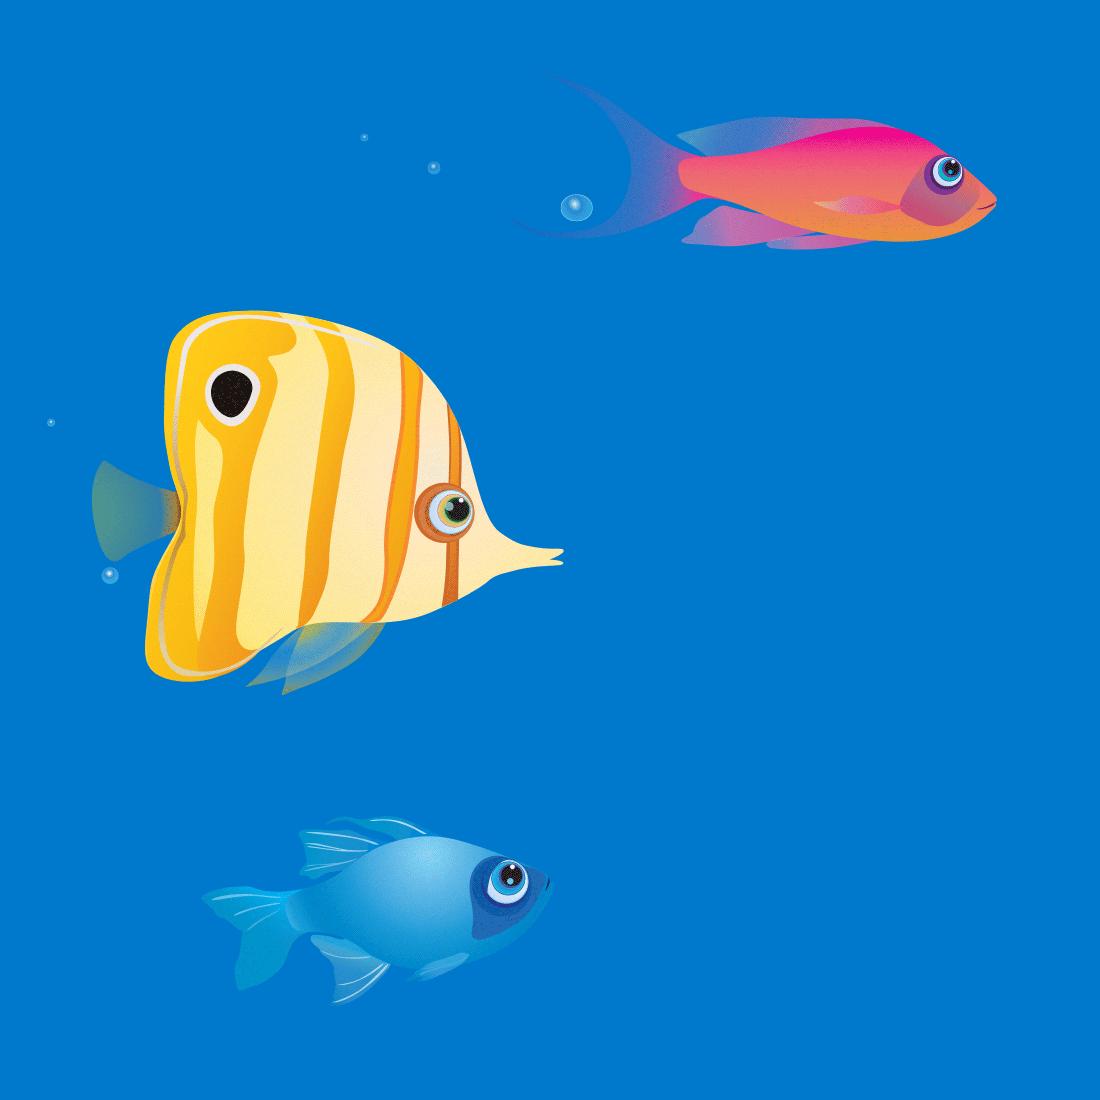 1100 x 1100 · animatedgif - Trout Clipart Animated Gif - Coral Reef Fish - 1100x1100 Wallpaper ...